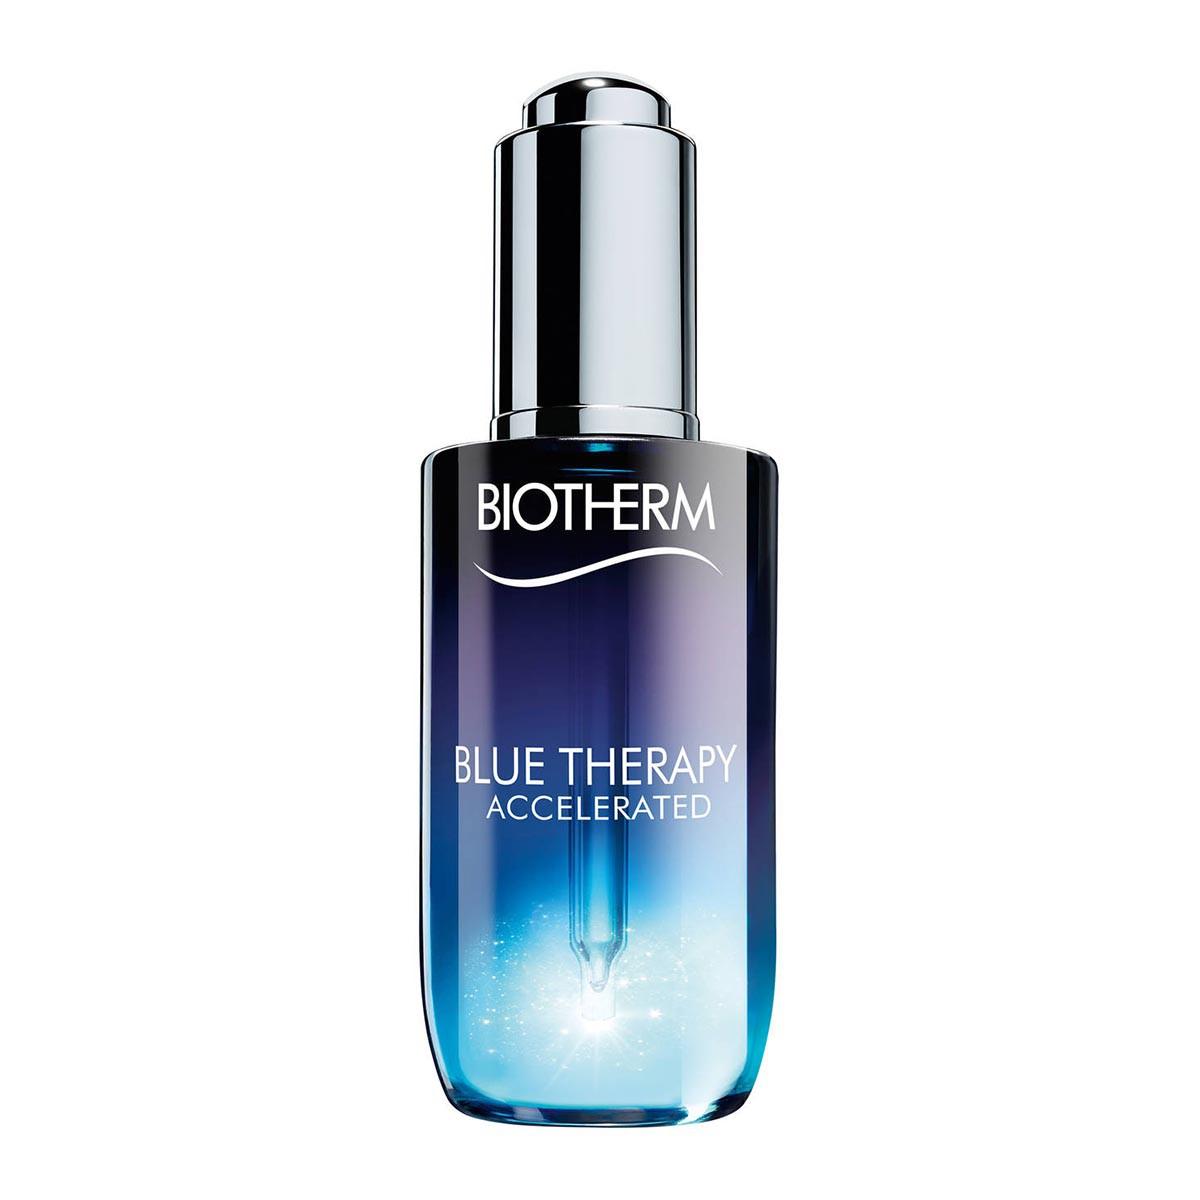 biotherm-alla-hudtyper-blue-therapy-accelerated-50ml